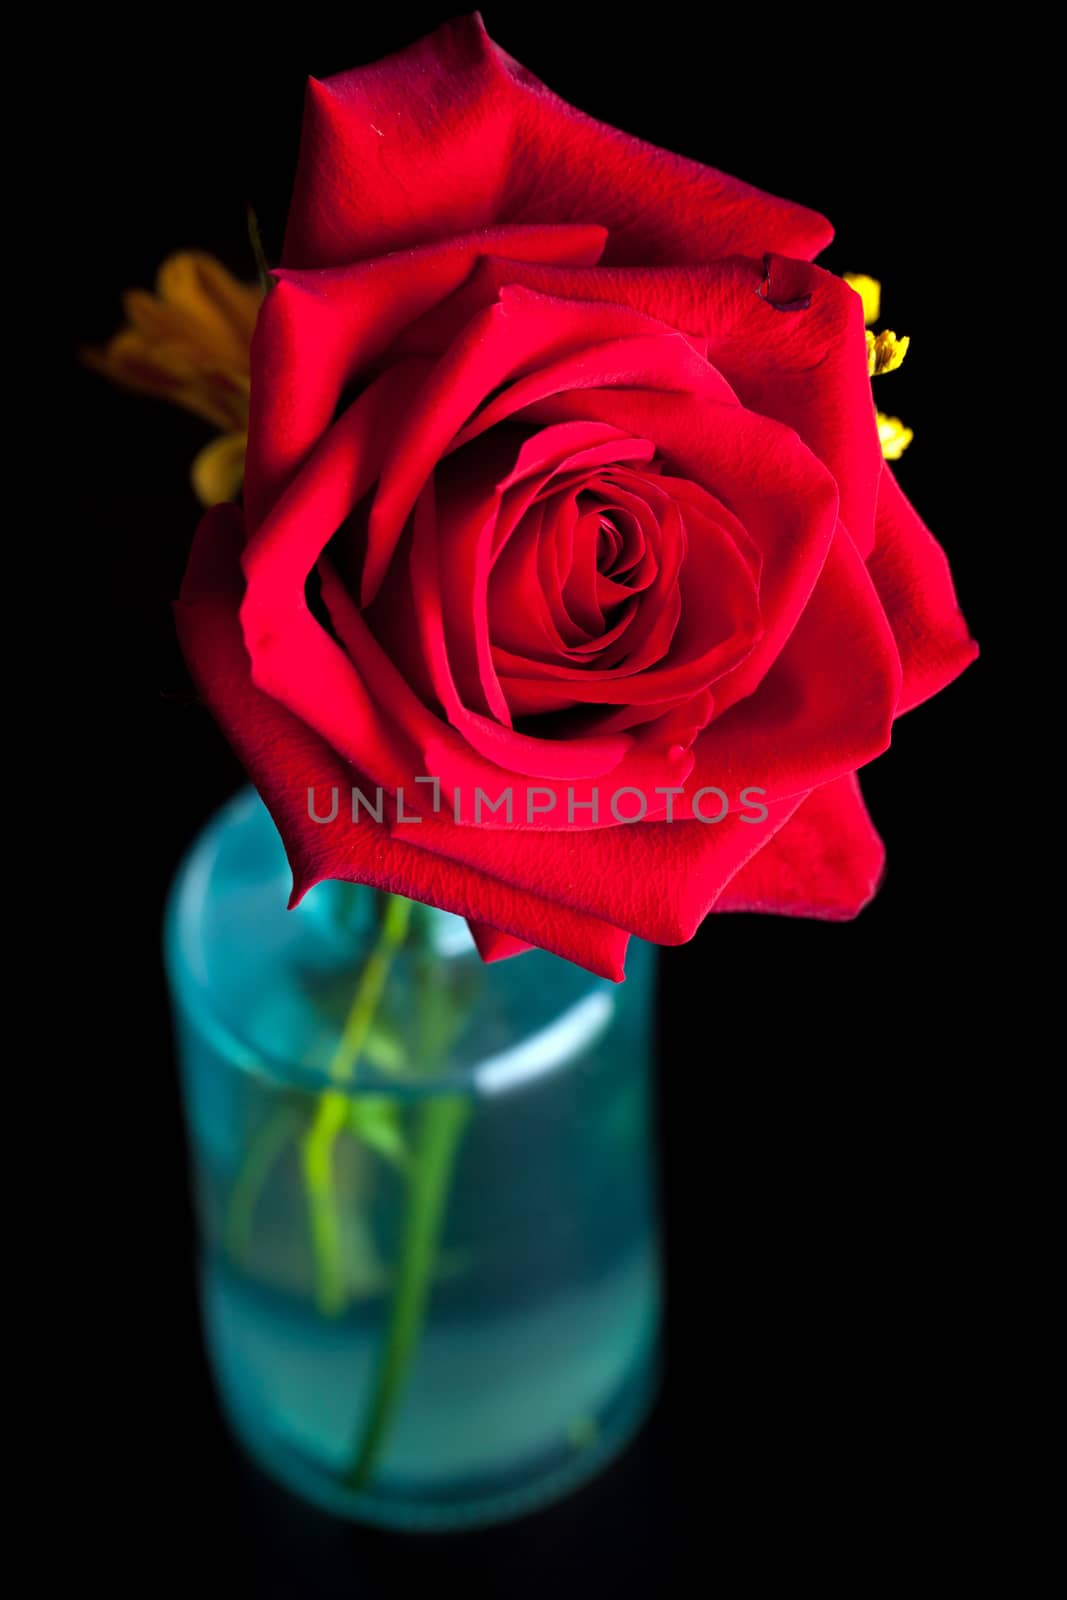 Red rose in a vase macro closeup showing the petals.  Shallow depth of field.